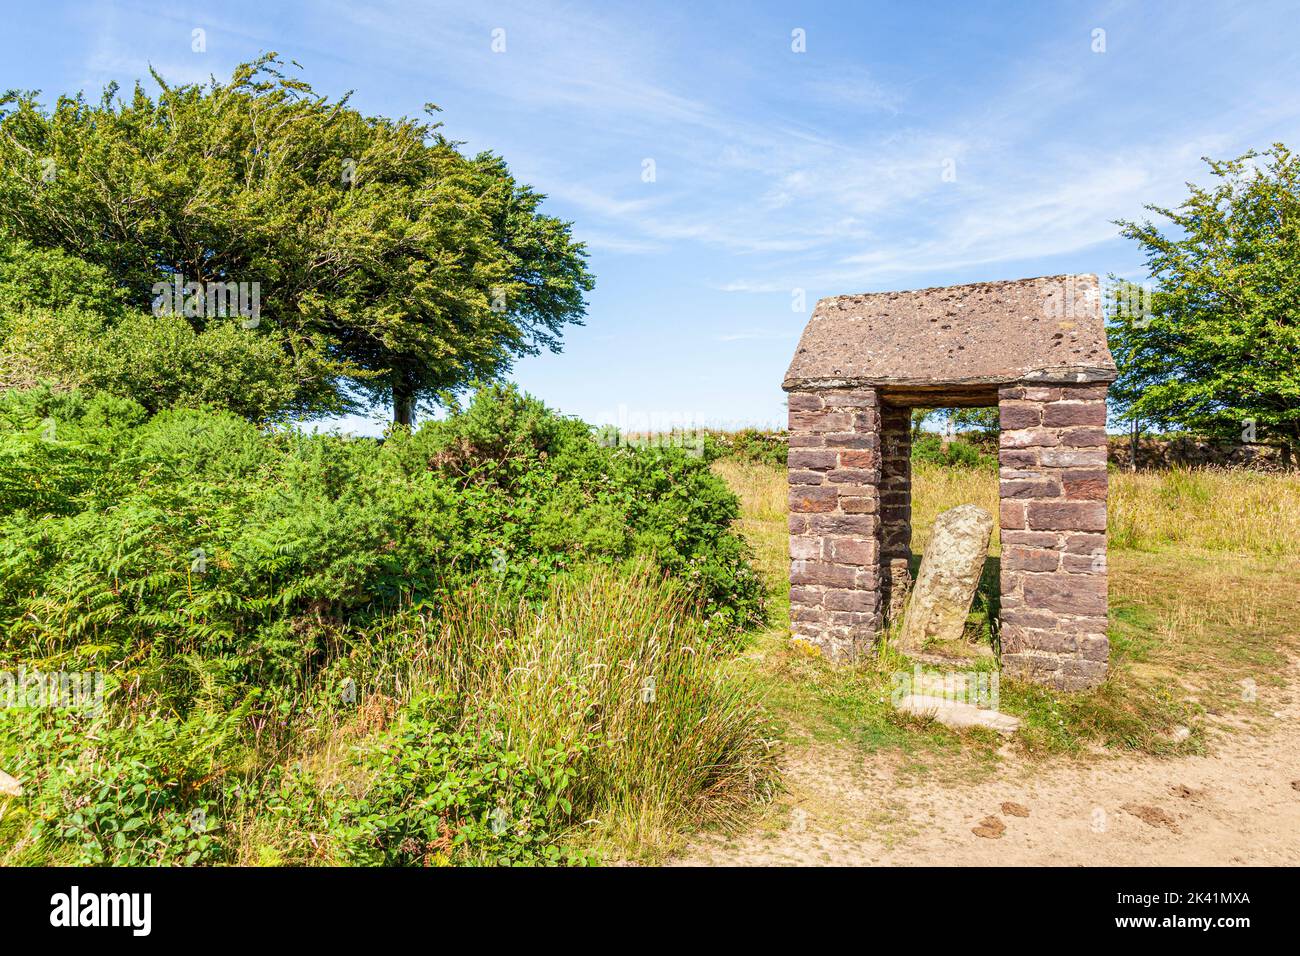 The Caractacus Stone (or Caratacus Stone), thought to date from the 6th century, on Winsford Hill in Exmoor National Park, Somerset UK Stock Photo